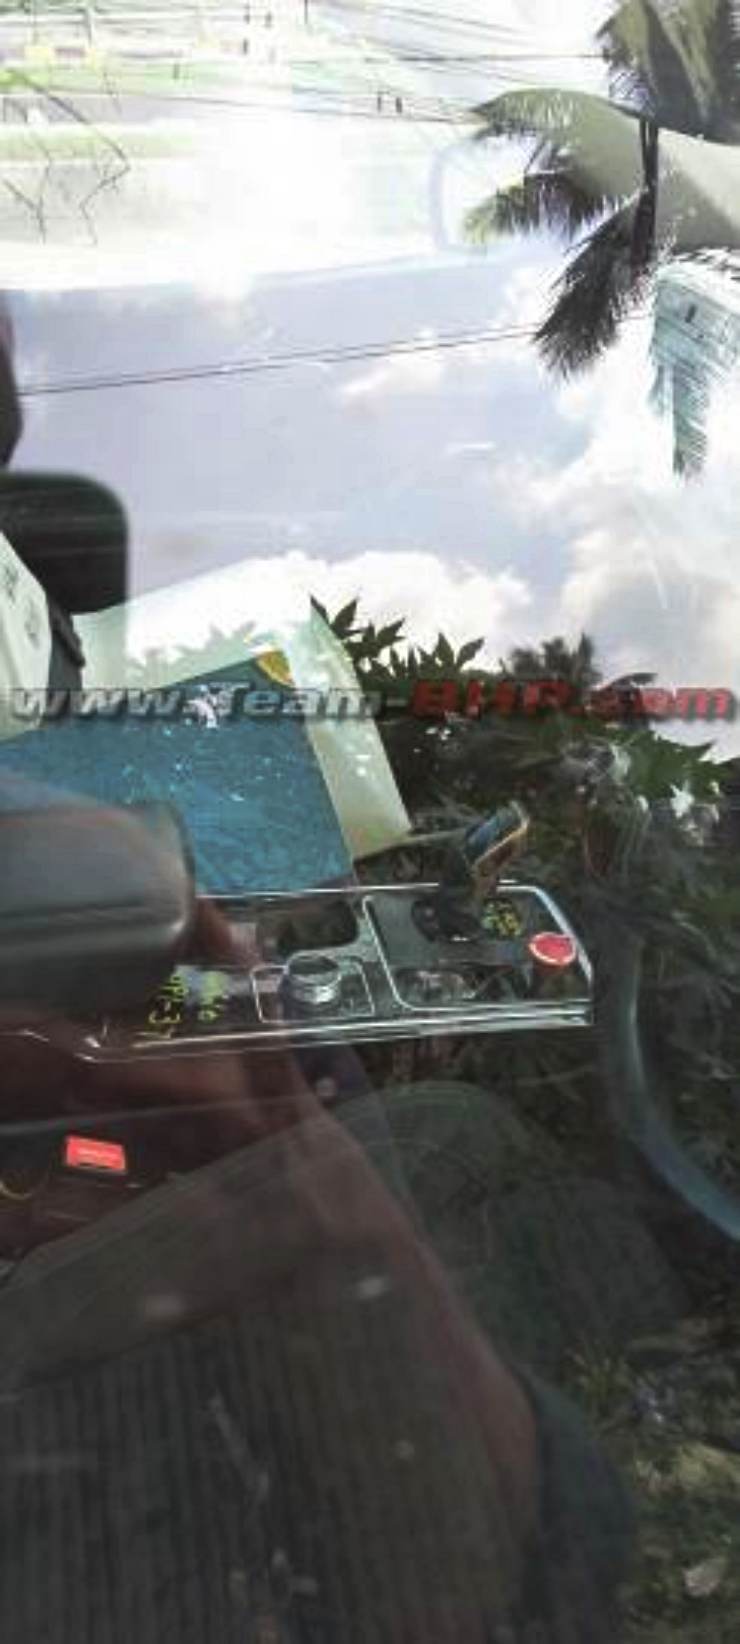 Mahindra XUV700-based XUV.e8 Electric SUV spotted testing again: New details revealed by spy shots